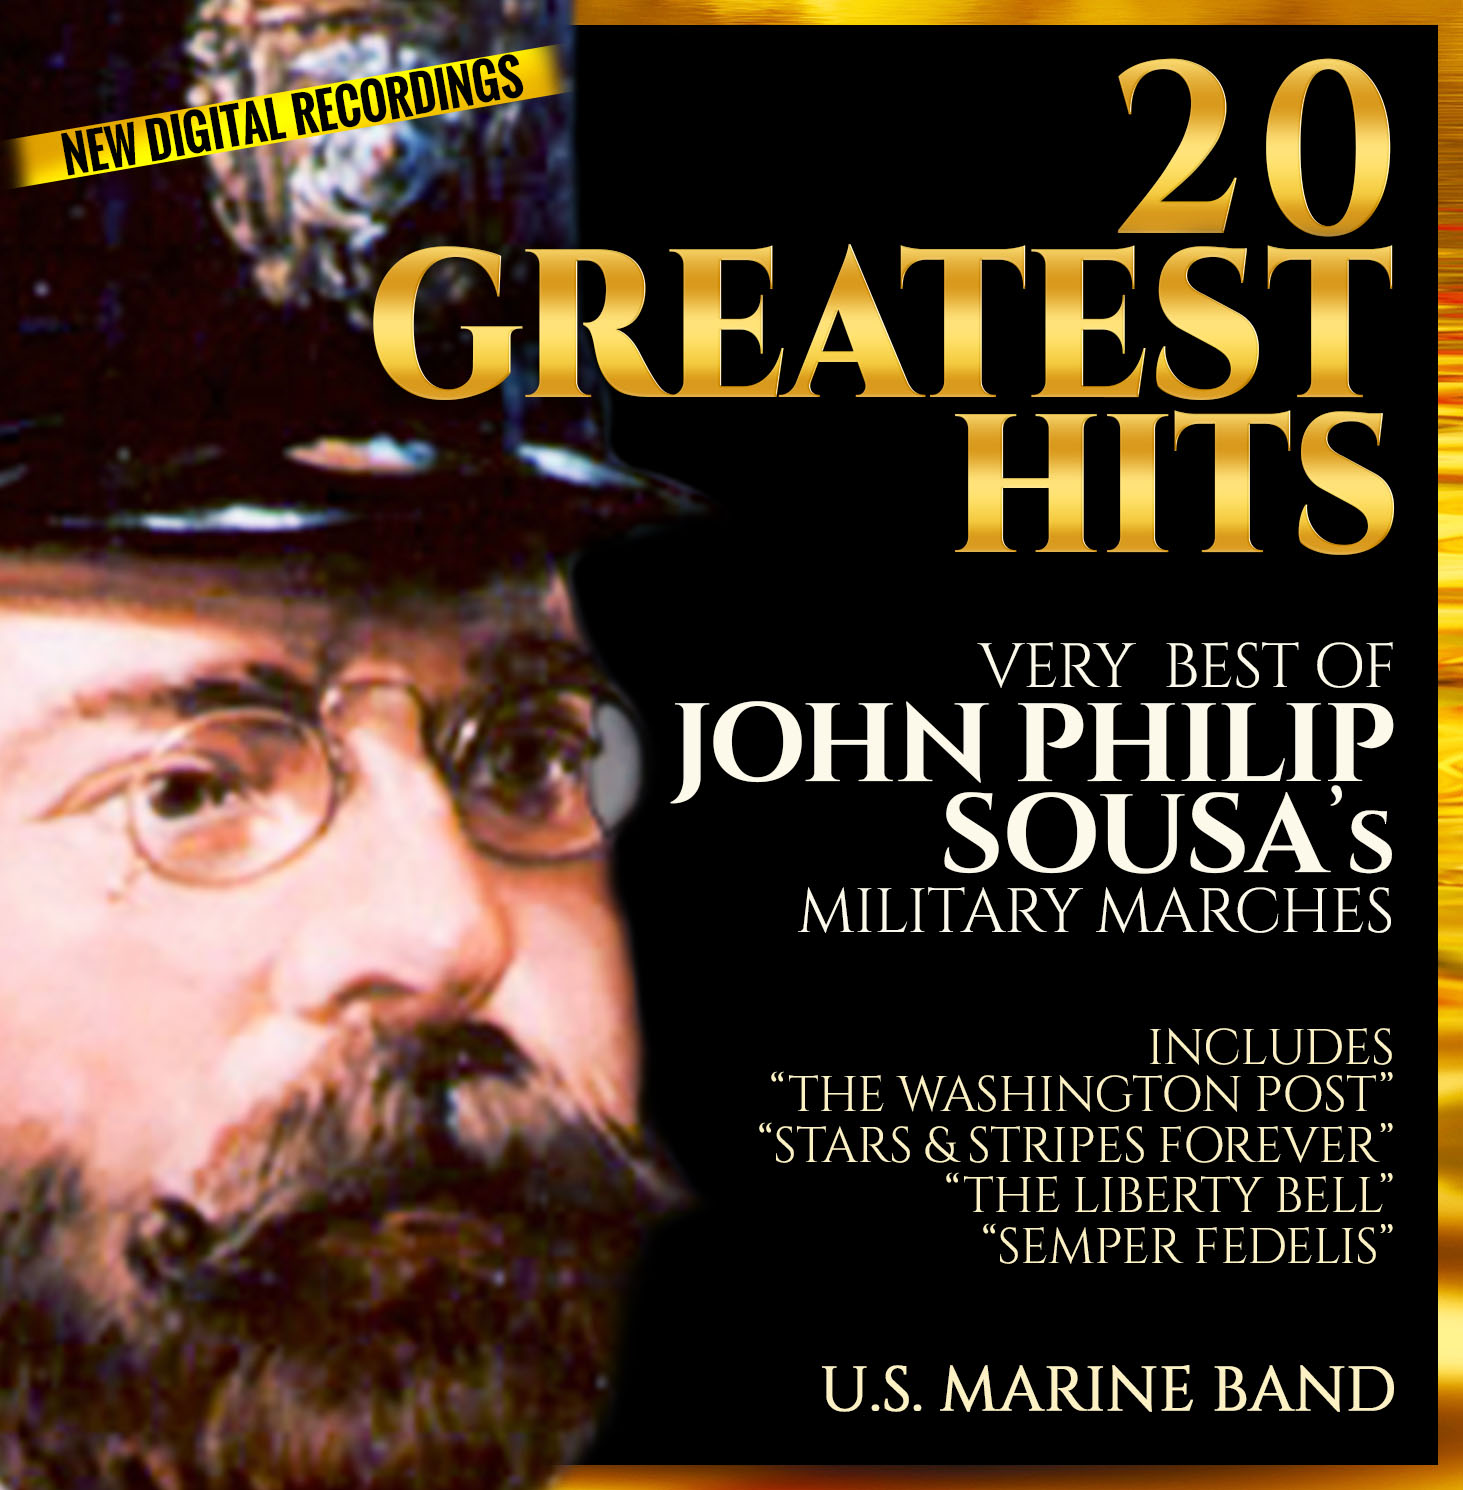 20 Greatest Hits - Very Best of John Philip Sousa